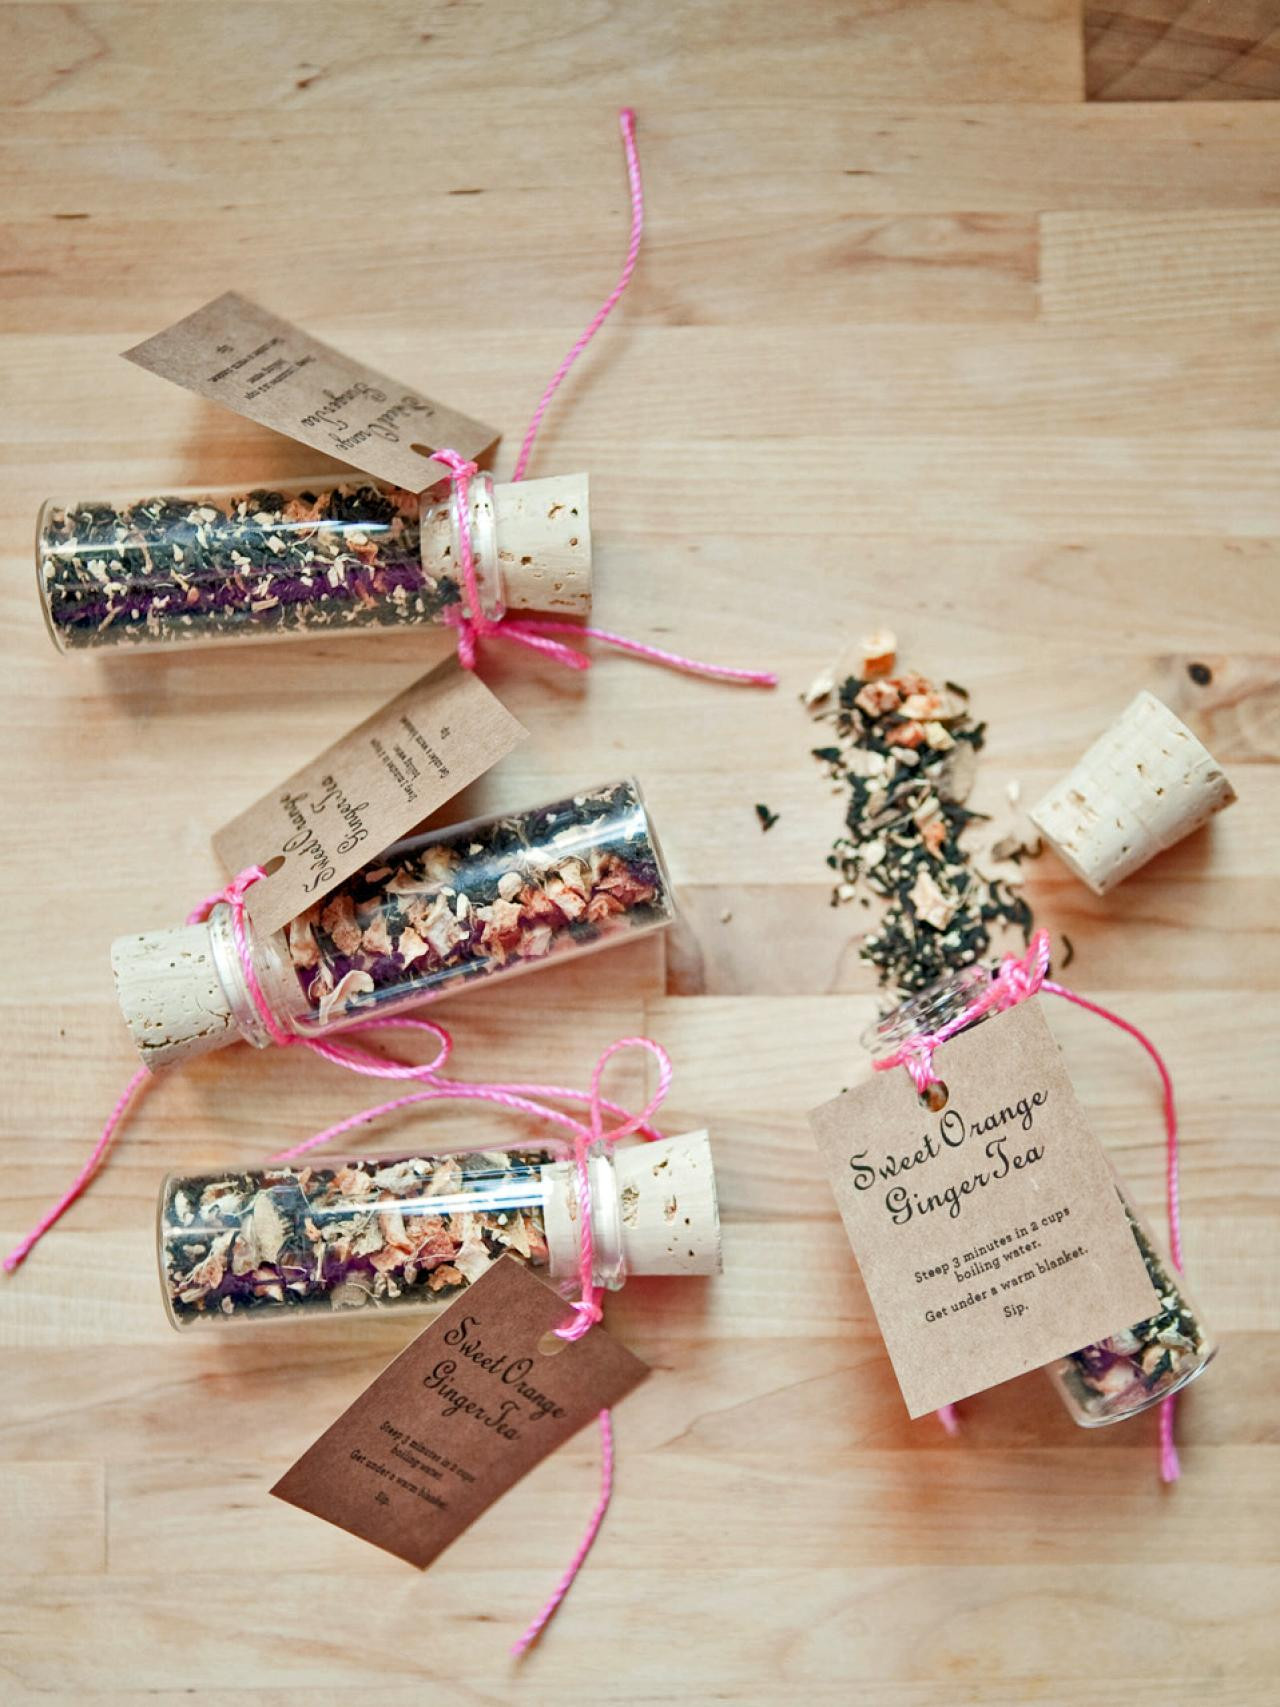 Homemade Wedding Gift Ideas
 30 Festive DIY Holiday Party Favors